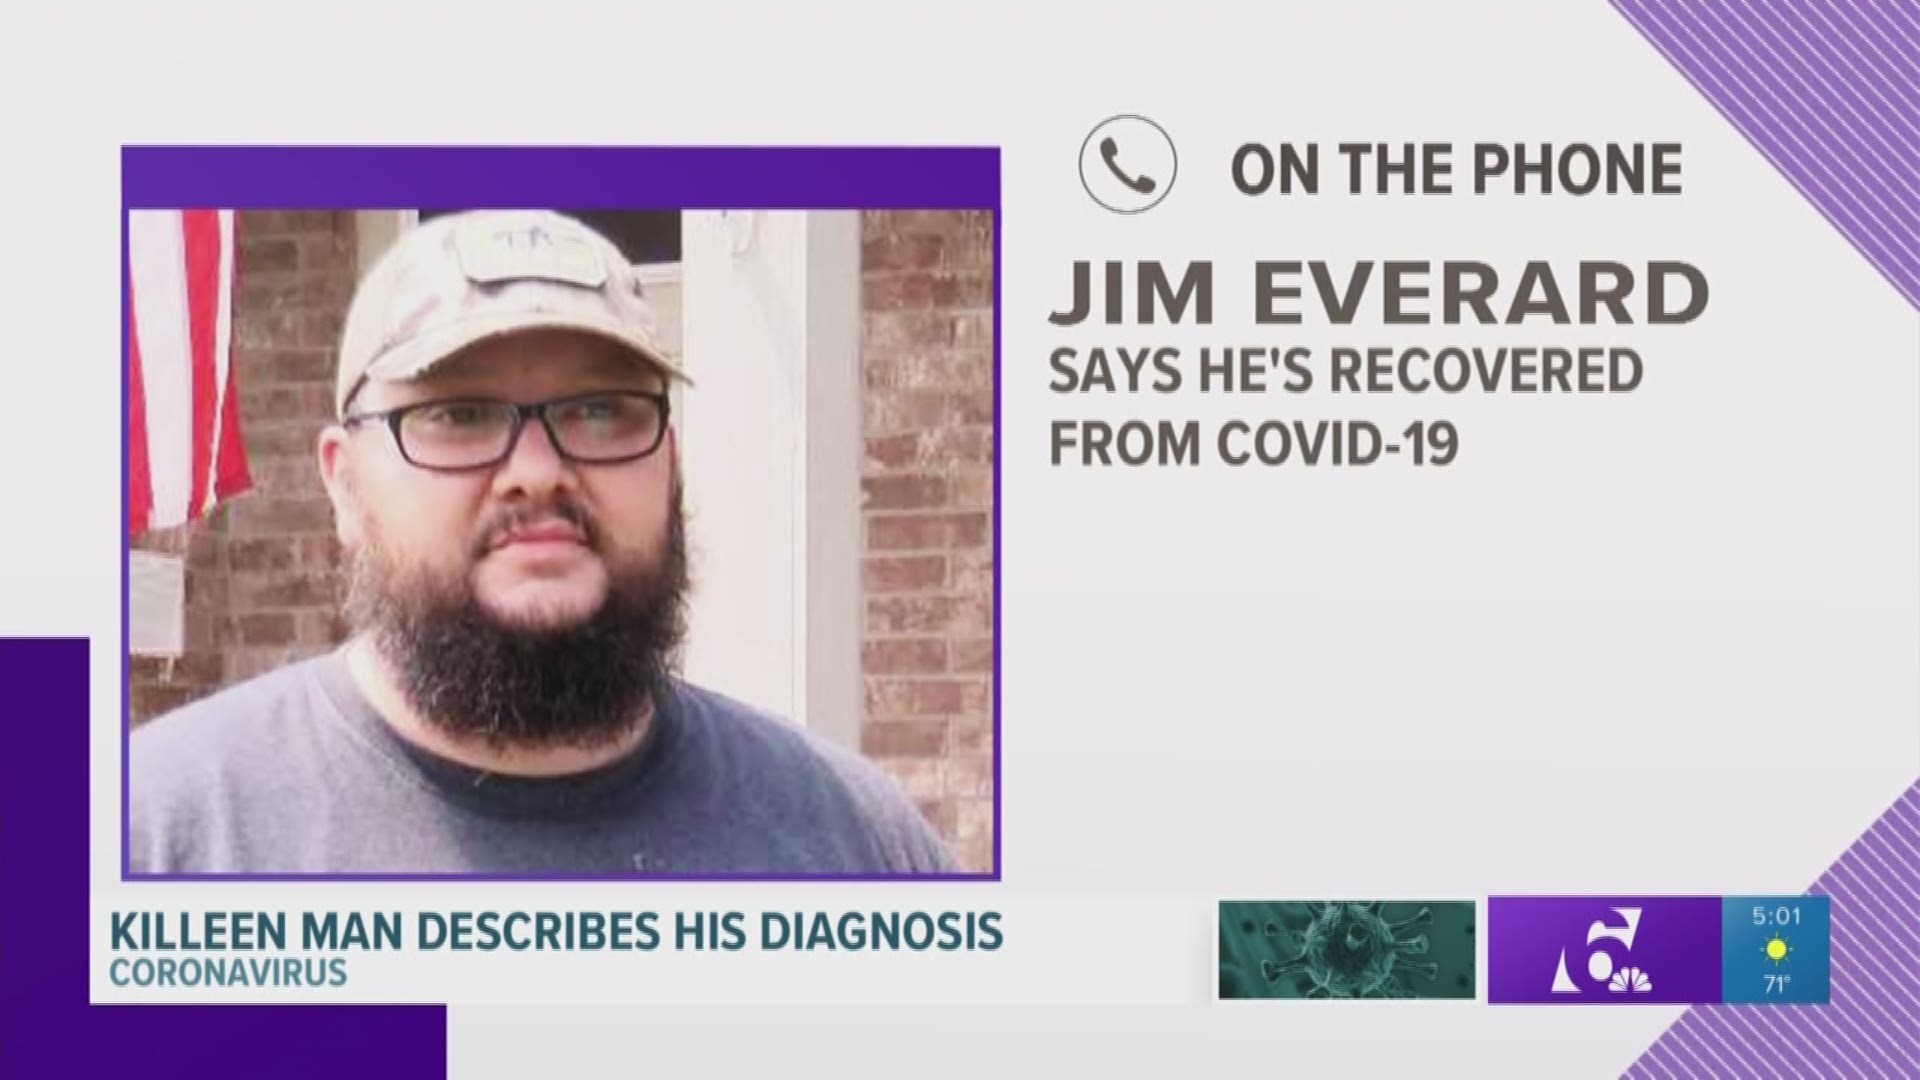 Jim Everard was tested for illness like flu and pneumonia but they were all negative. After self-quarantining with his family for two weeks, he shared his experience